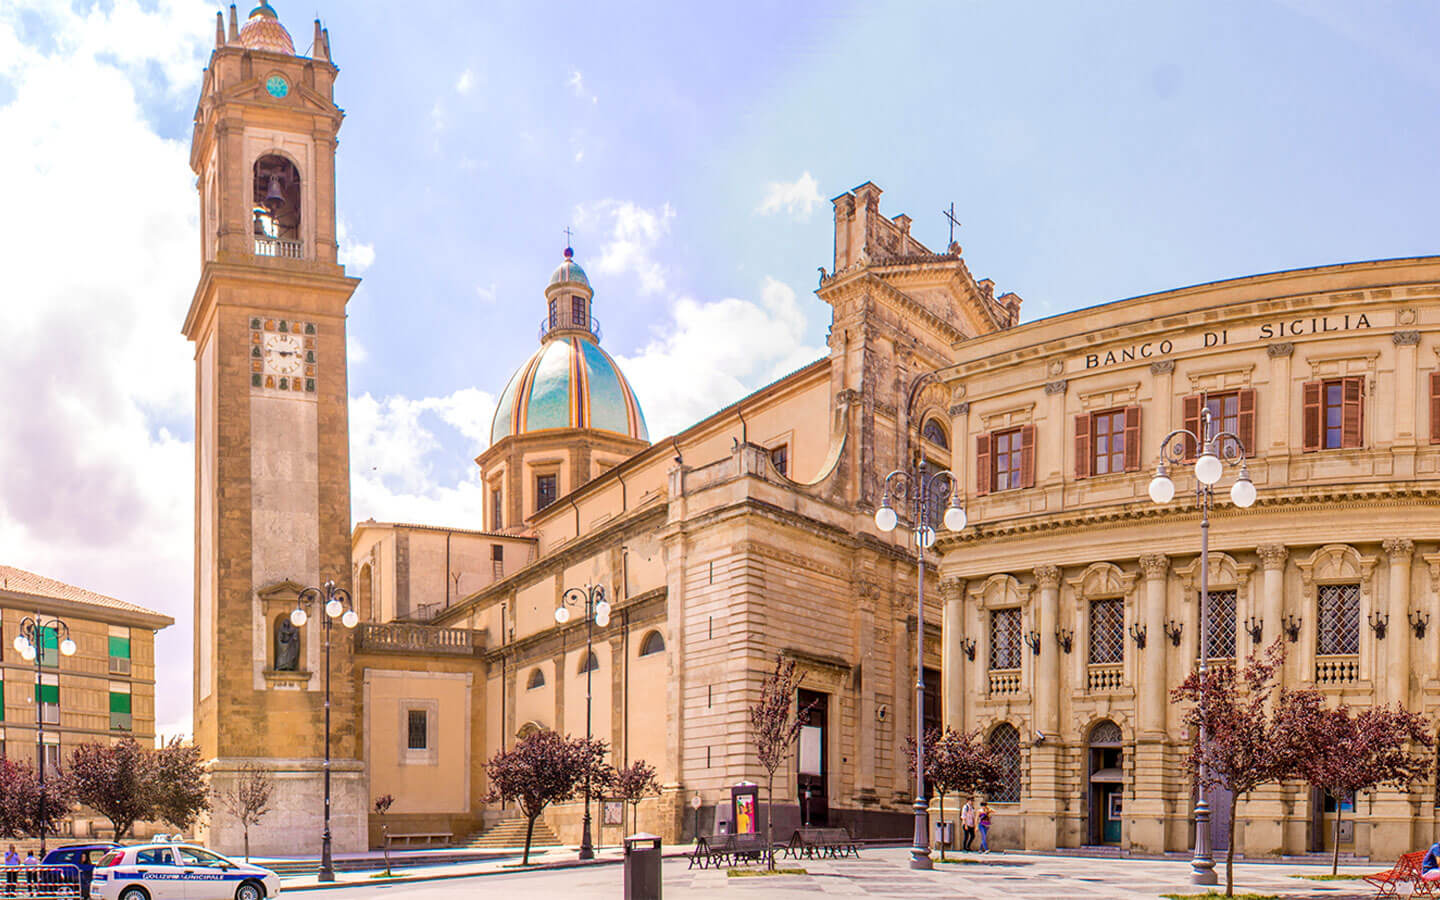 Piazza Armerina and Caltagirone